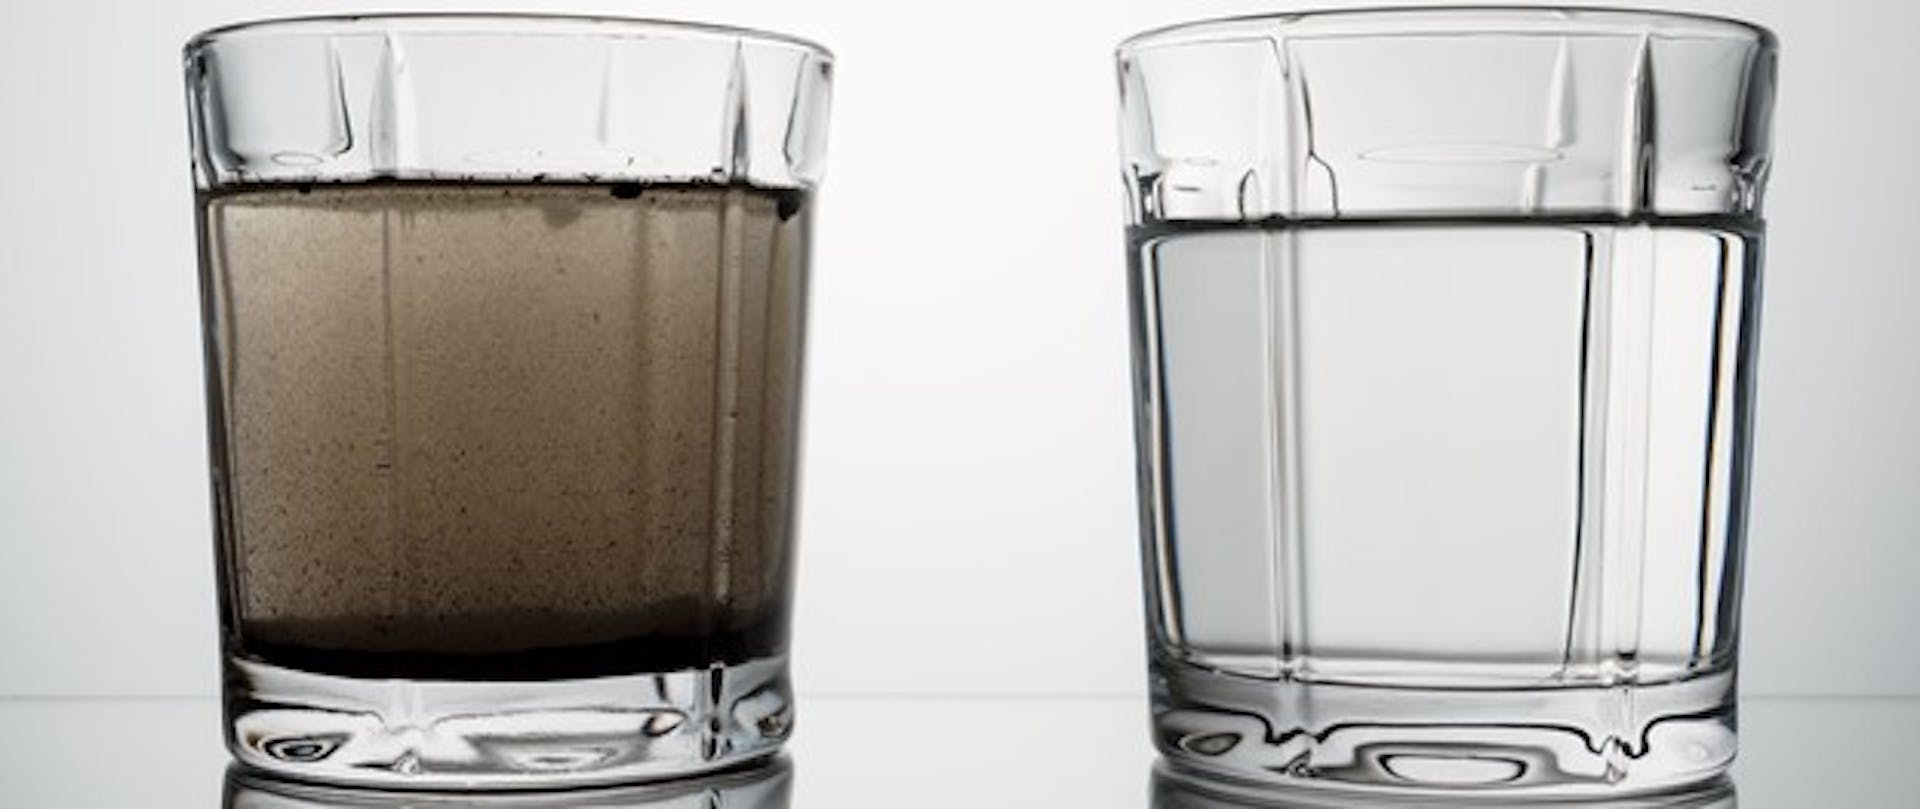 Water Filters Comparison Image of Filtered and Unfiltered Water